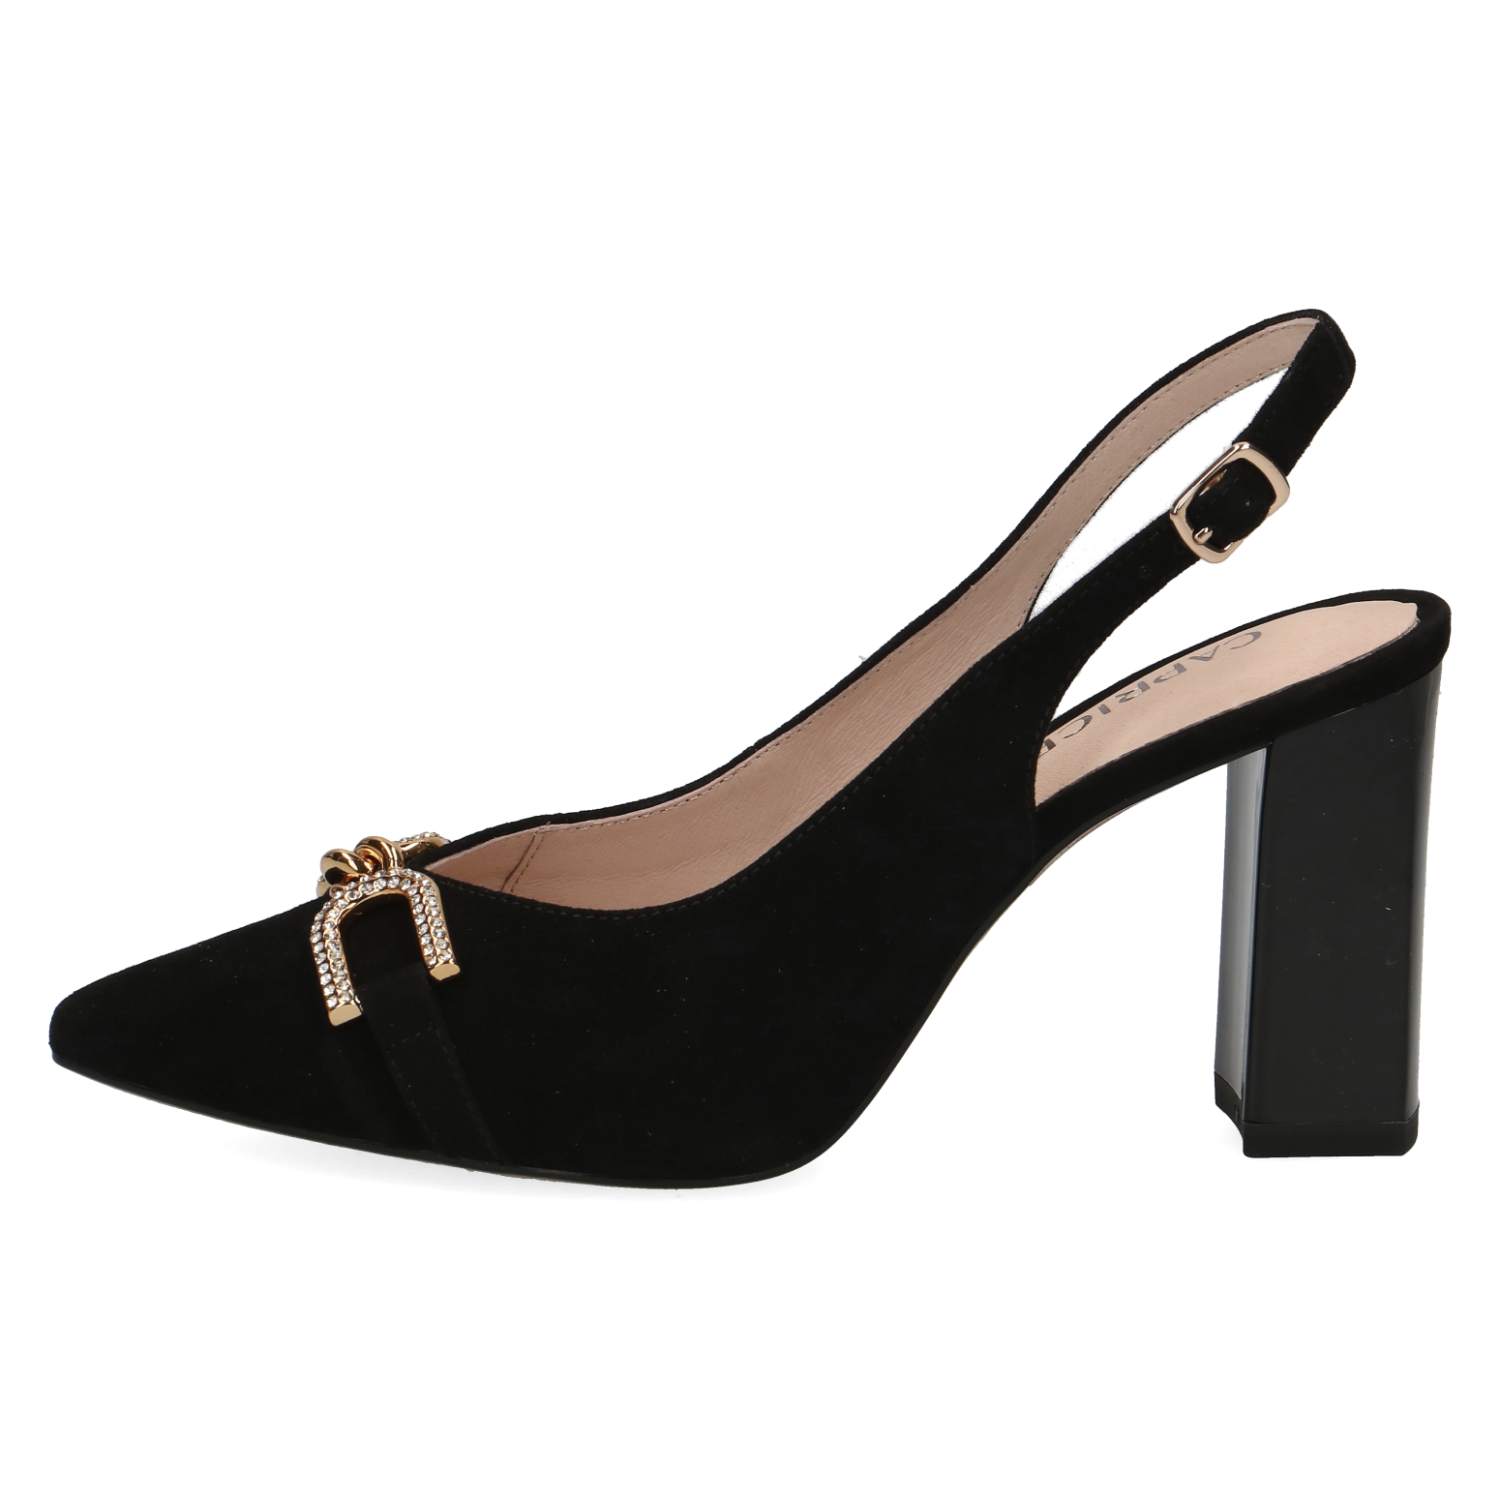 Front view of Black Suede Slingback by Caprice.